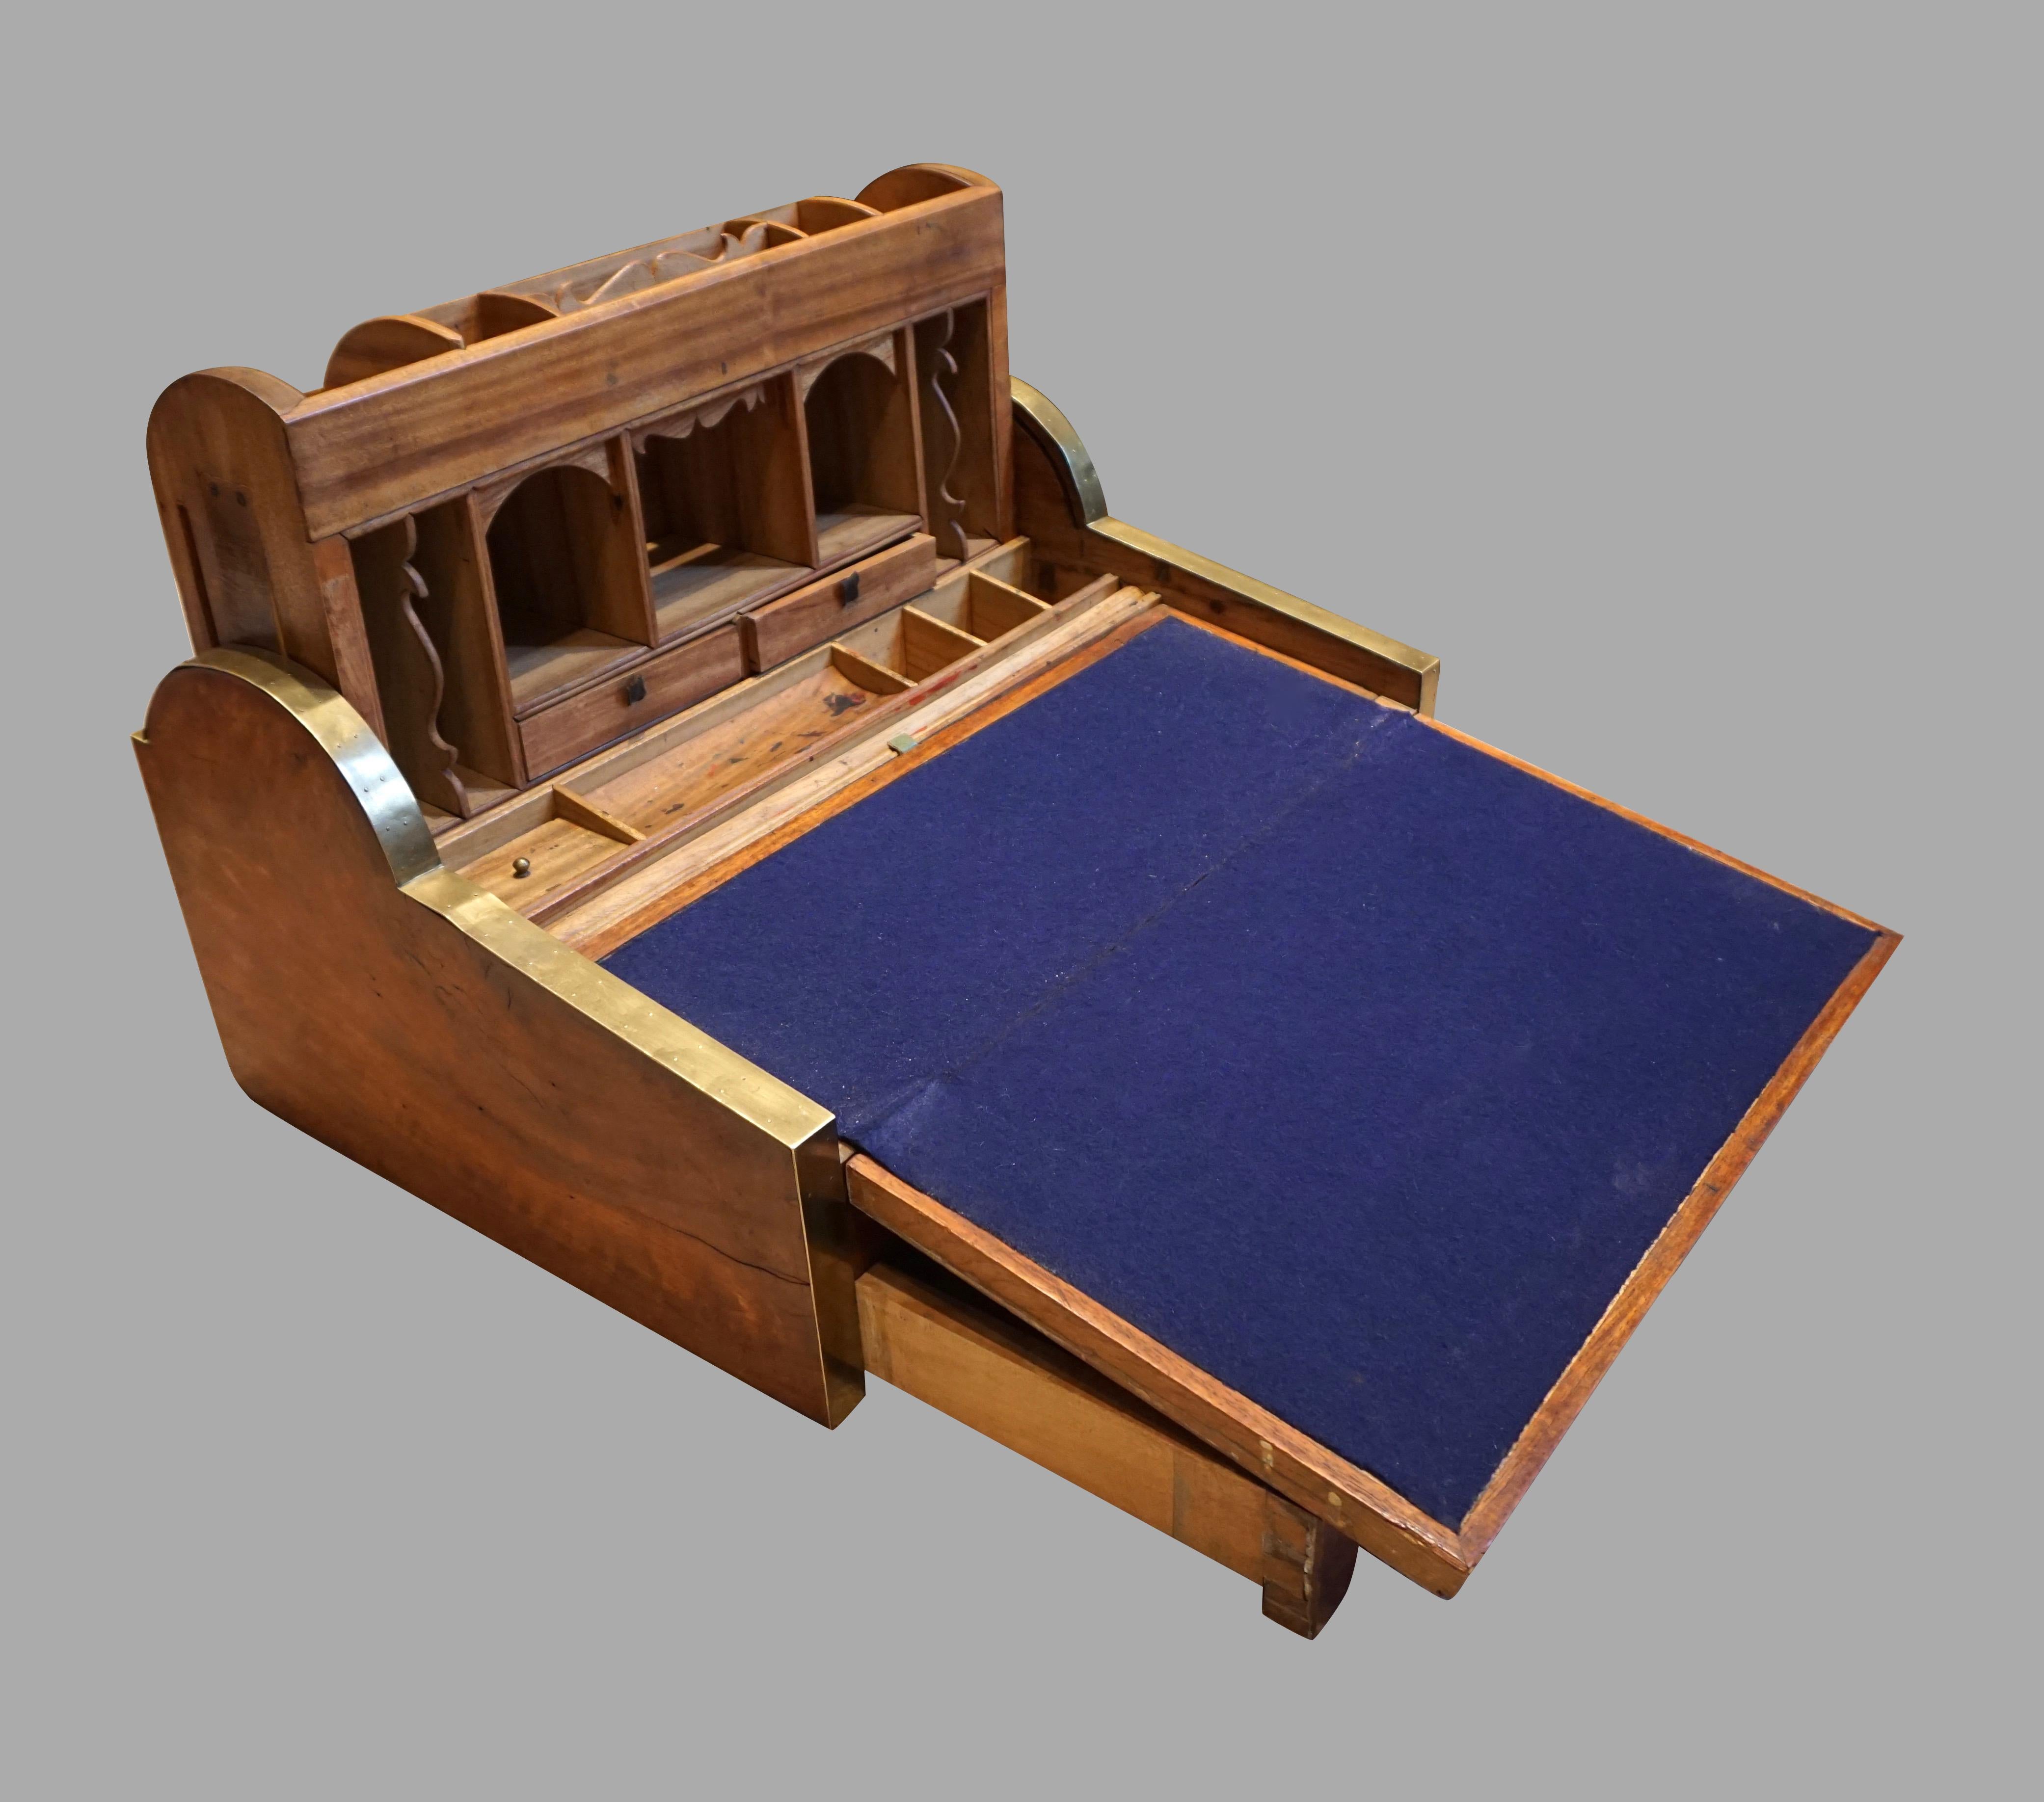 A Chinese export solid camphorwood brass inlaid and banded writing slope, the tambour activated by retracting the central drawer to reveal a rising section containing a variety of small drawers and cubby holes, the sloped writing surface lined in